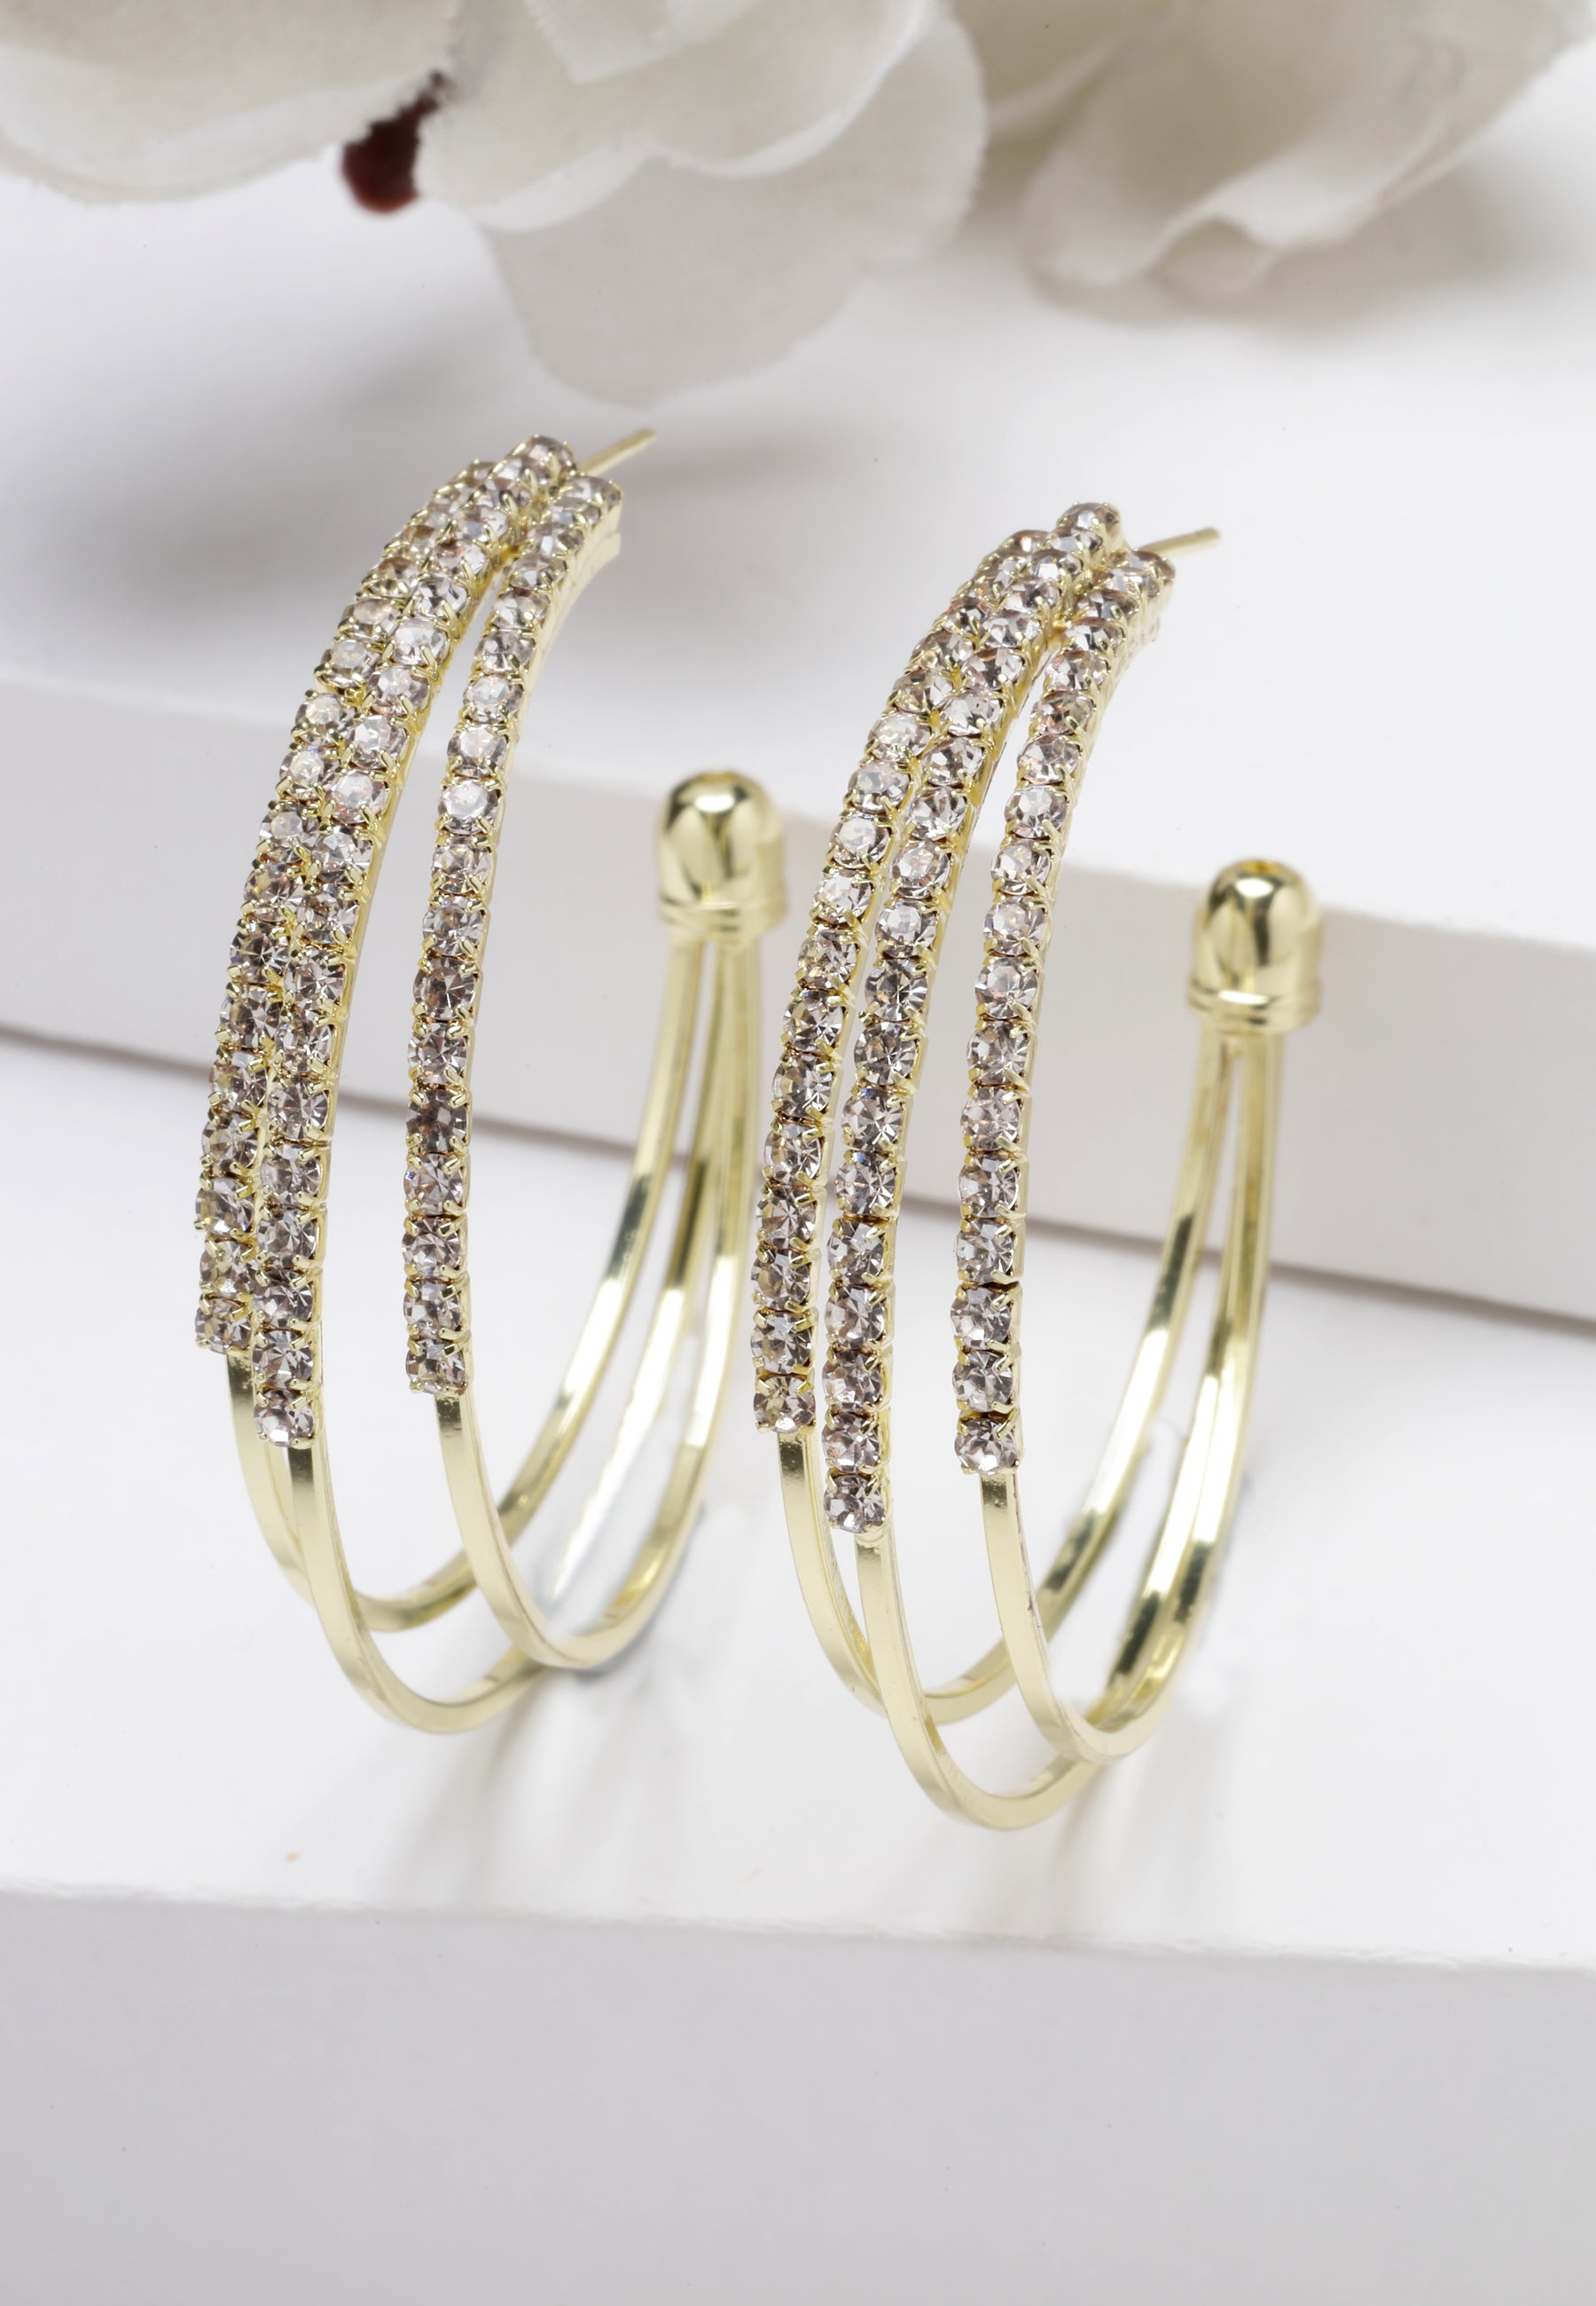 C Shape Gold-Colored Crystal Earrings